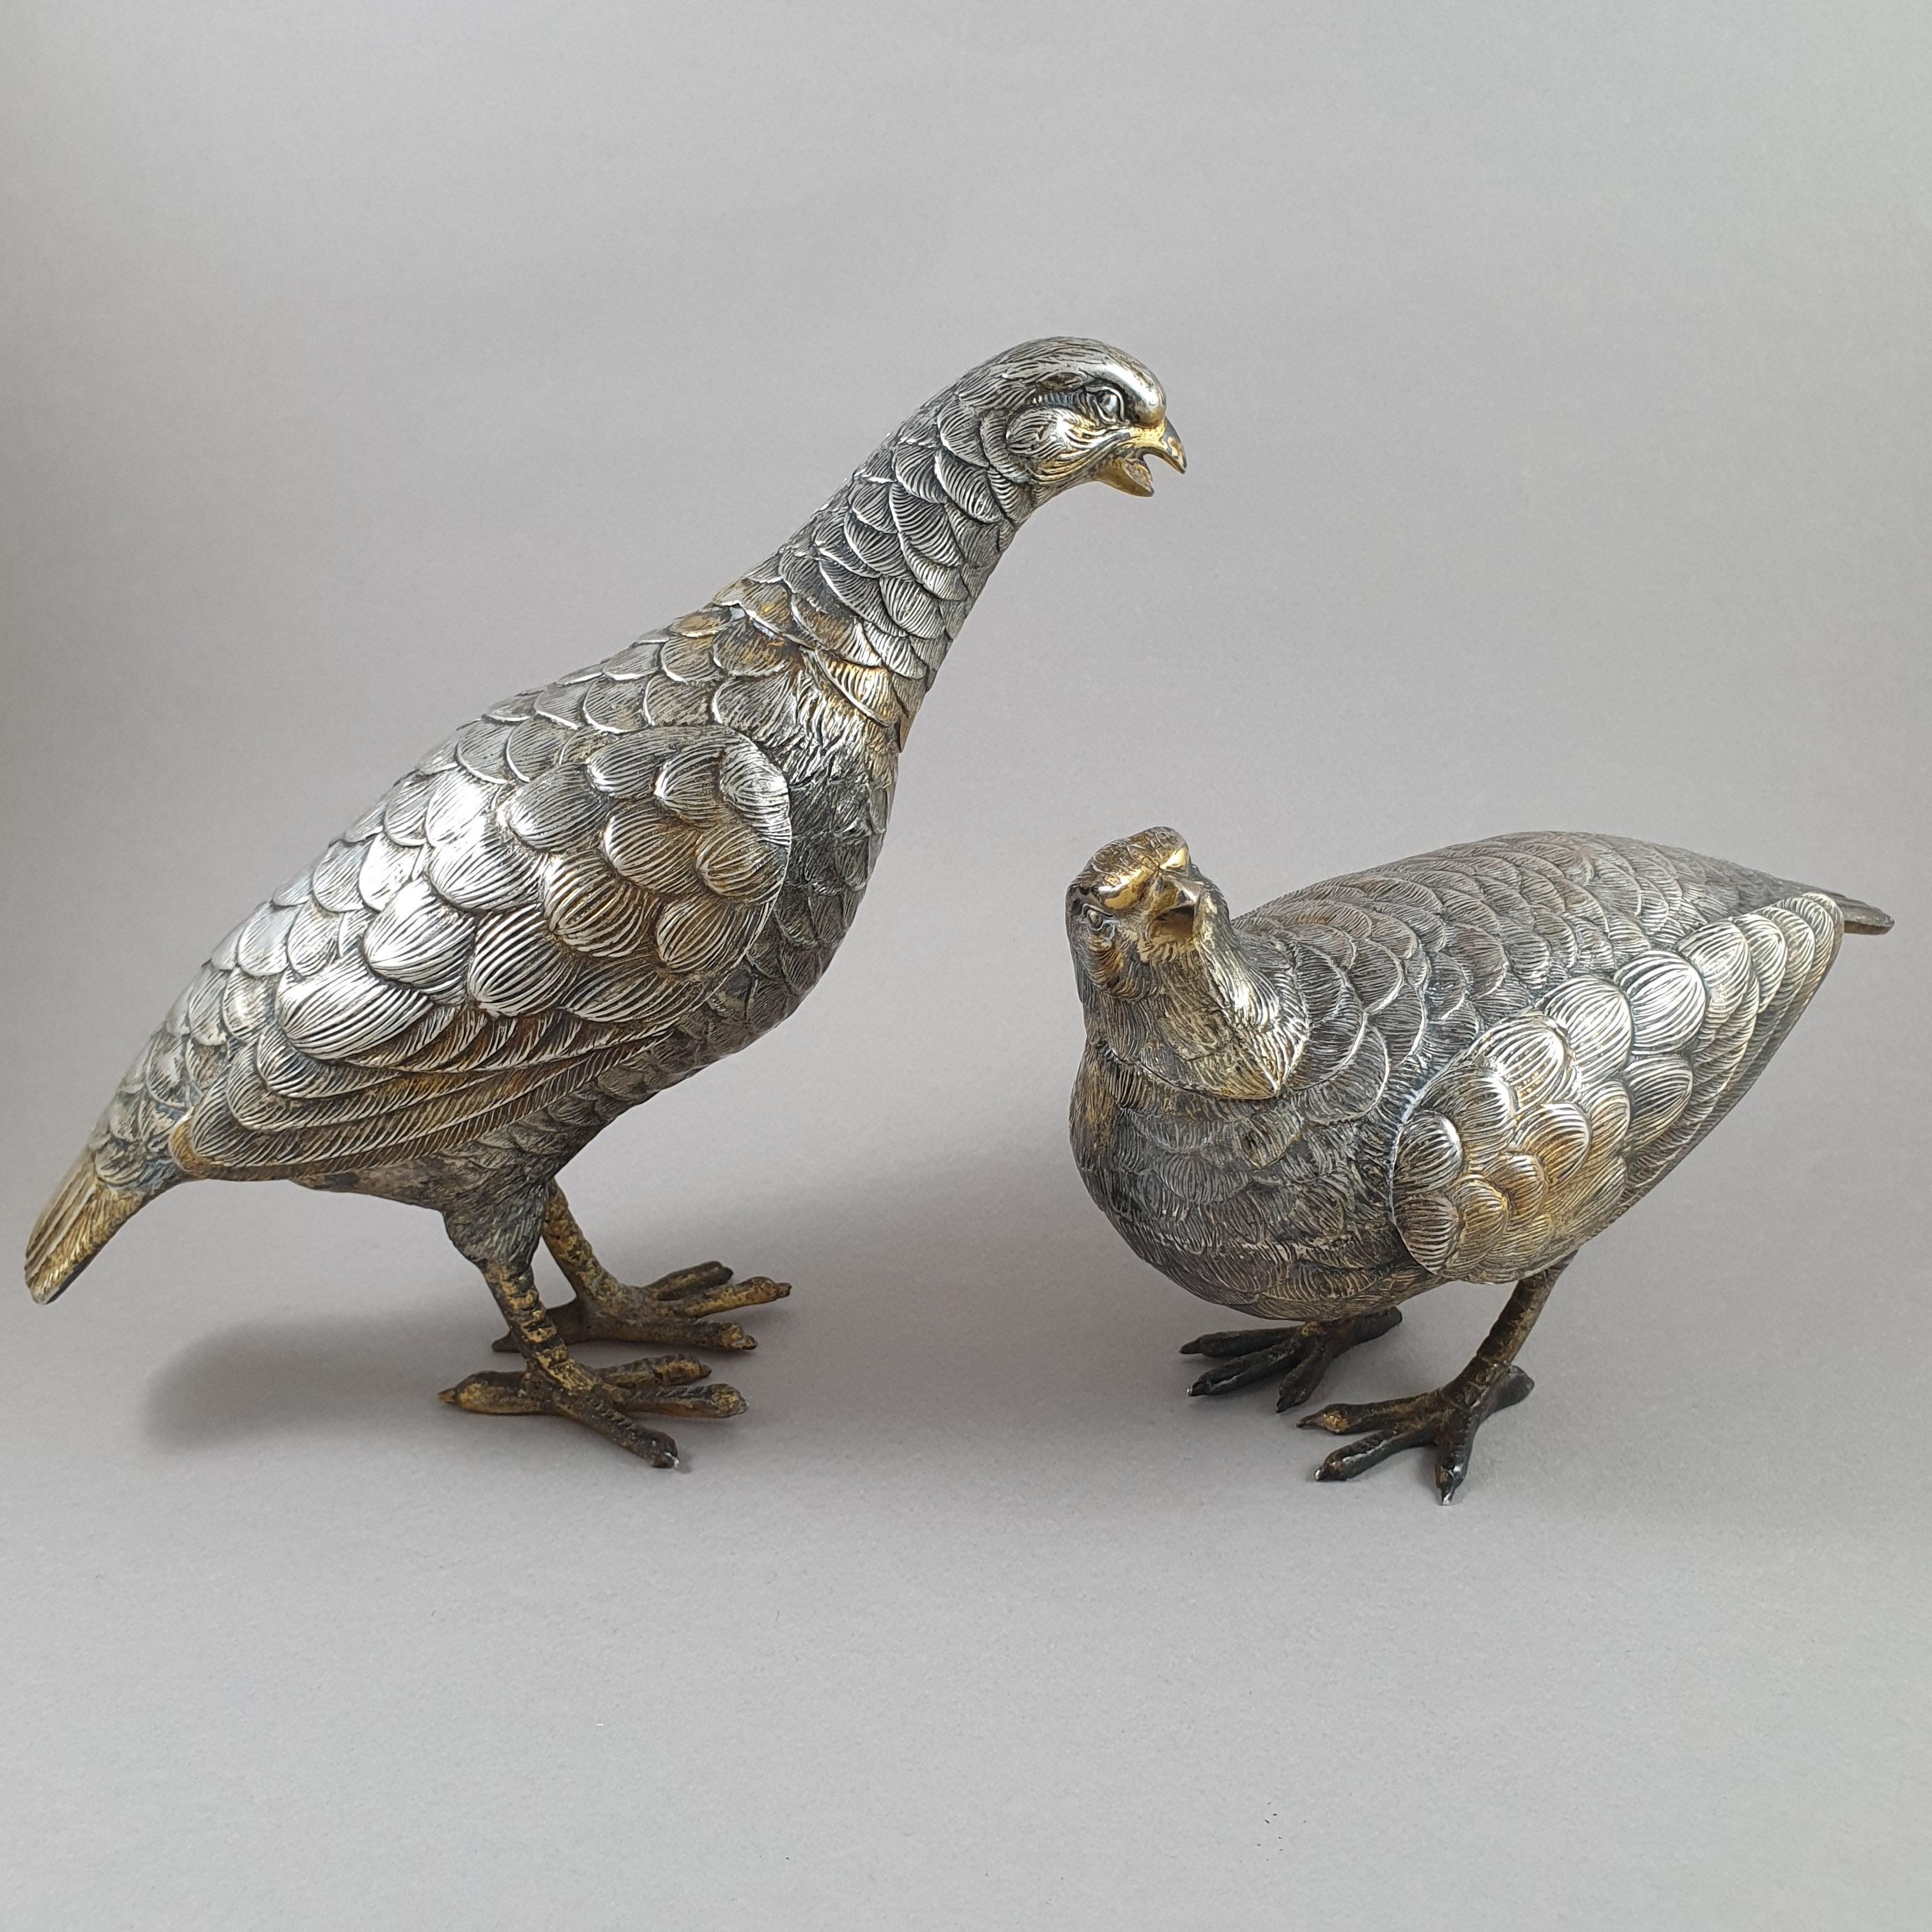 Two birds in sterling silver and light gilt.

Silver hallmark: a star 

Small bird 
Length: 15.6 cm - 6.4 inches
Height: 10 cm - 3.9 inches

Large bird
Length: 18 cm - 7 inches
Height: 16.2 cm - 6.3 inches

Weight: 472 grams.